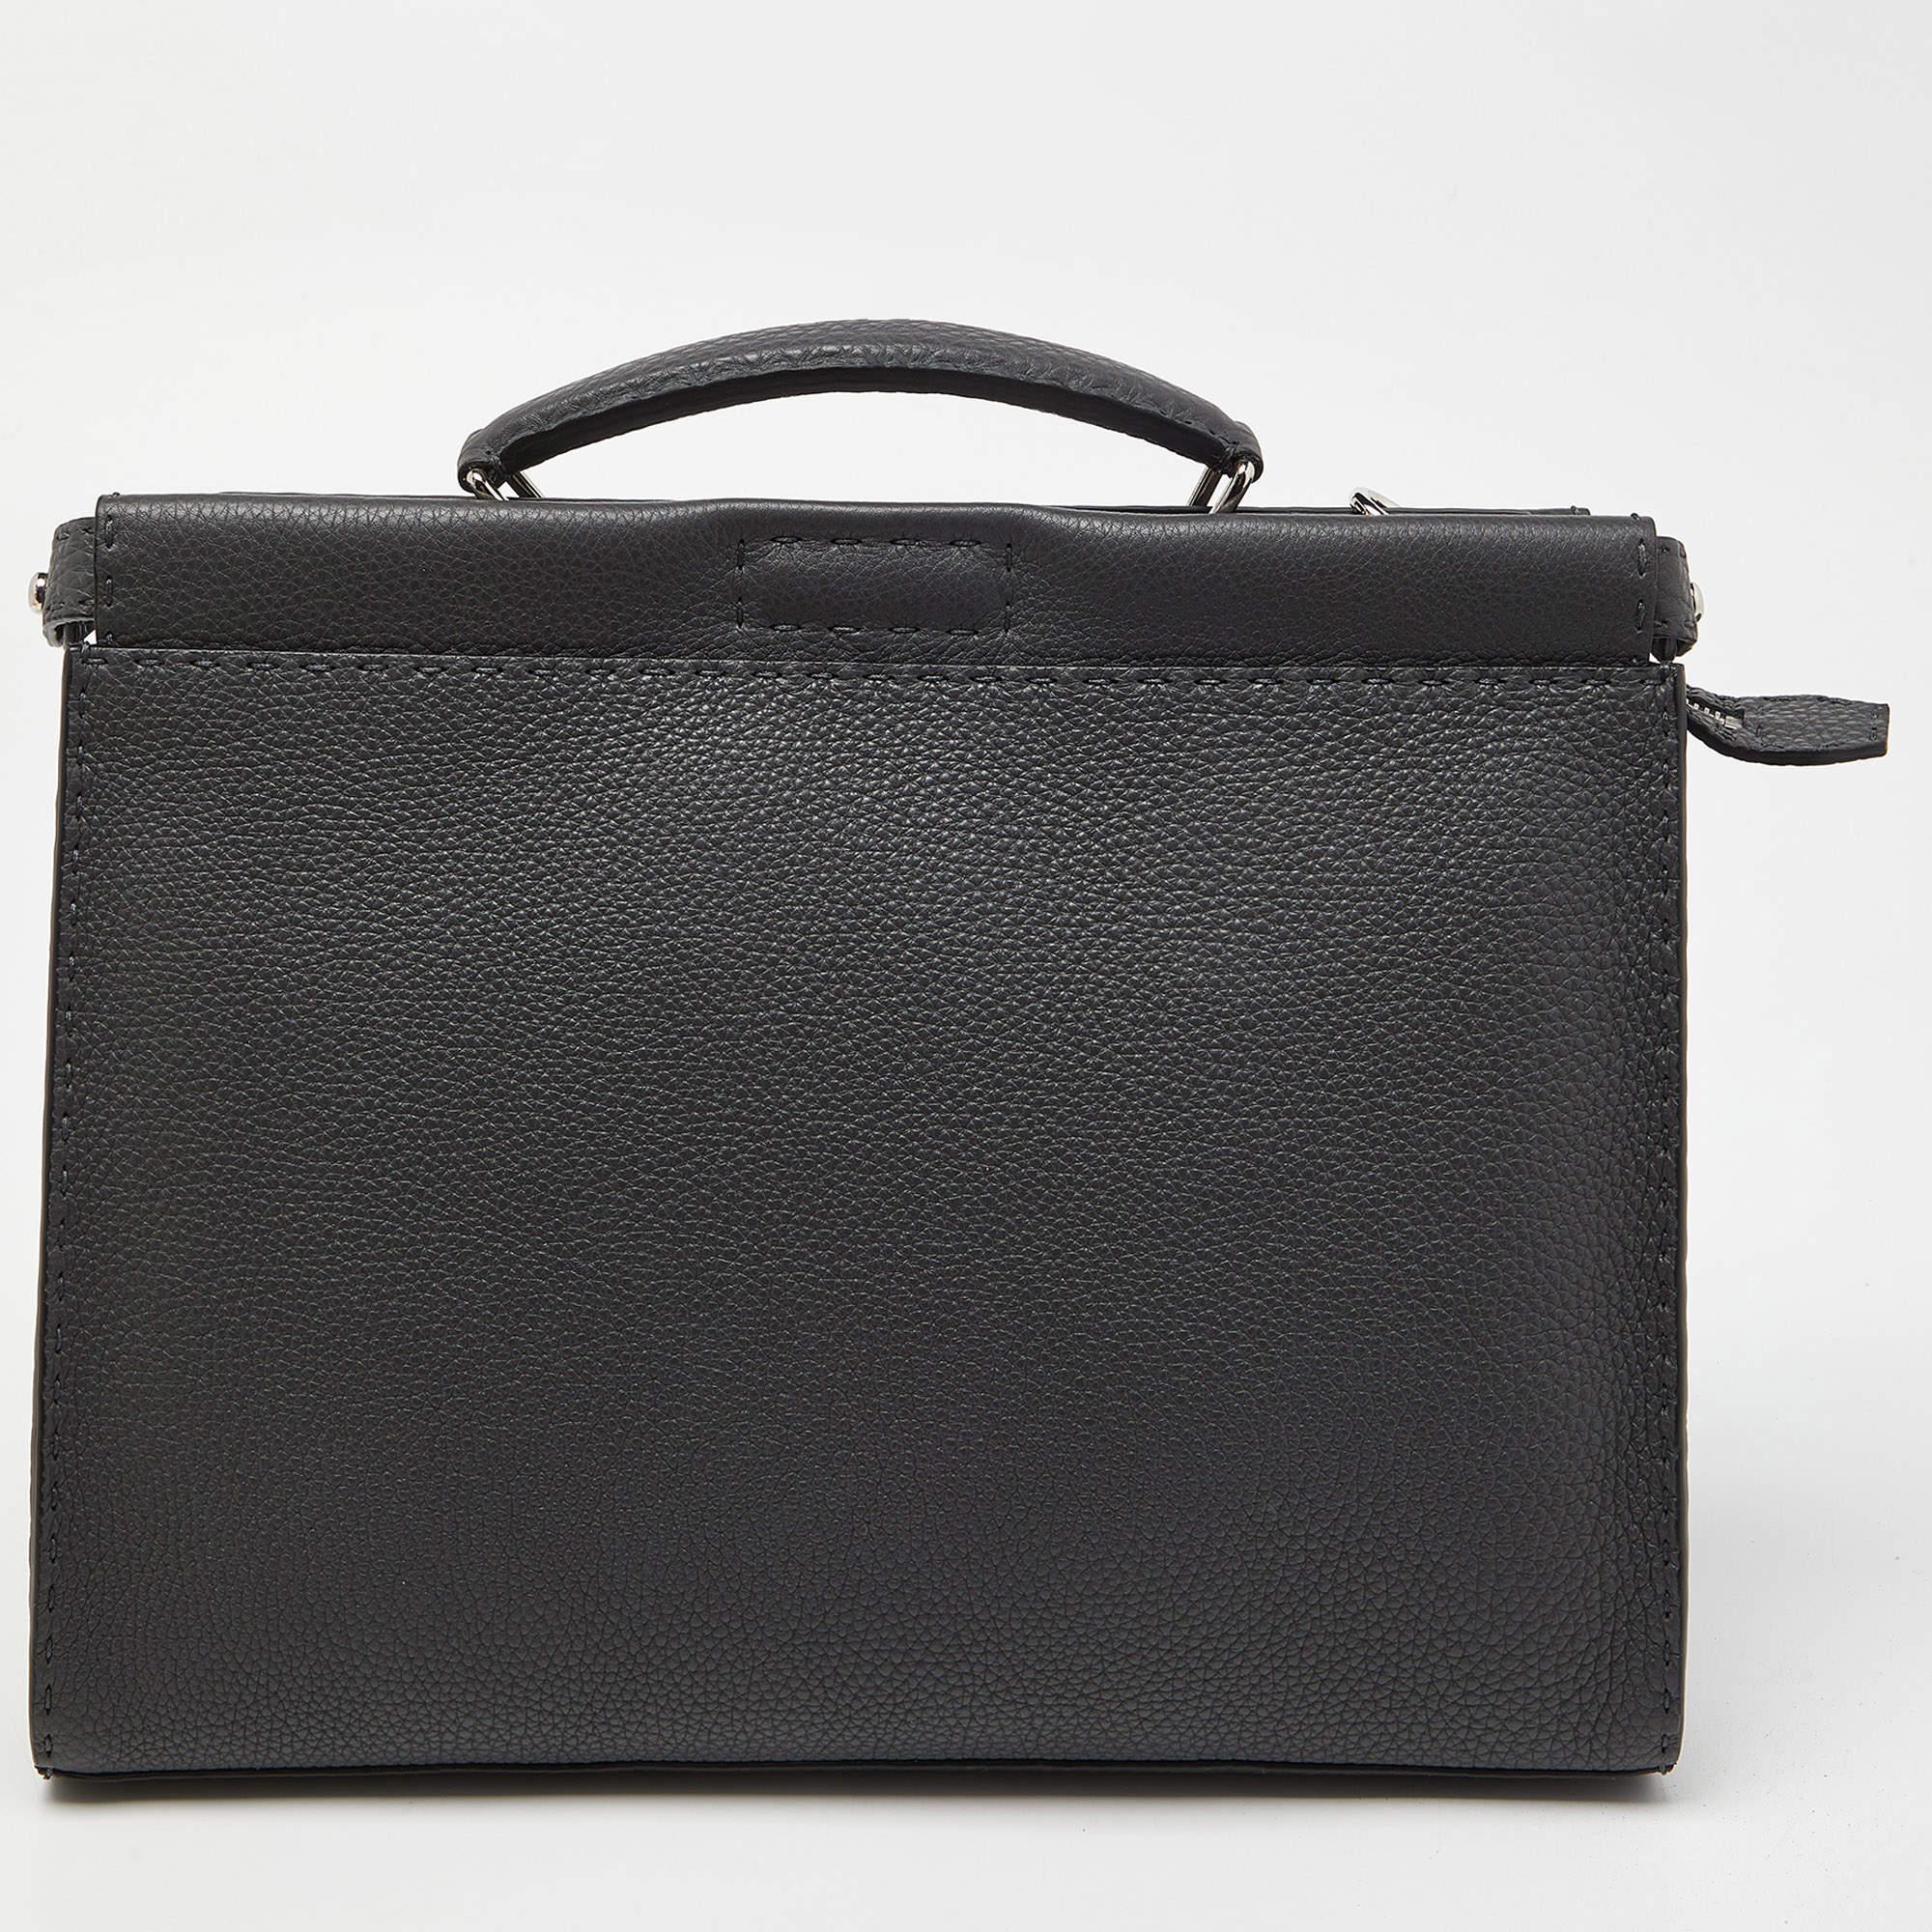 The Peekaboo ISeeU briefcase by Fendi is an ultra-functional choice to carry your essentials! Crafted using leather, the briefcase is perfect for frequent use. It includes a top handle, a shoulder strap, and a spacious interior.

Includes: Original